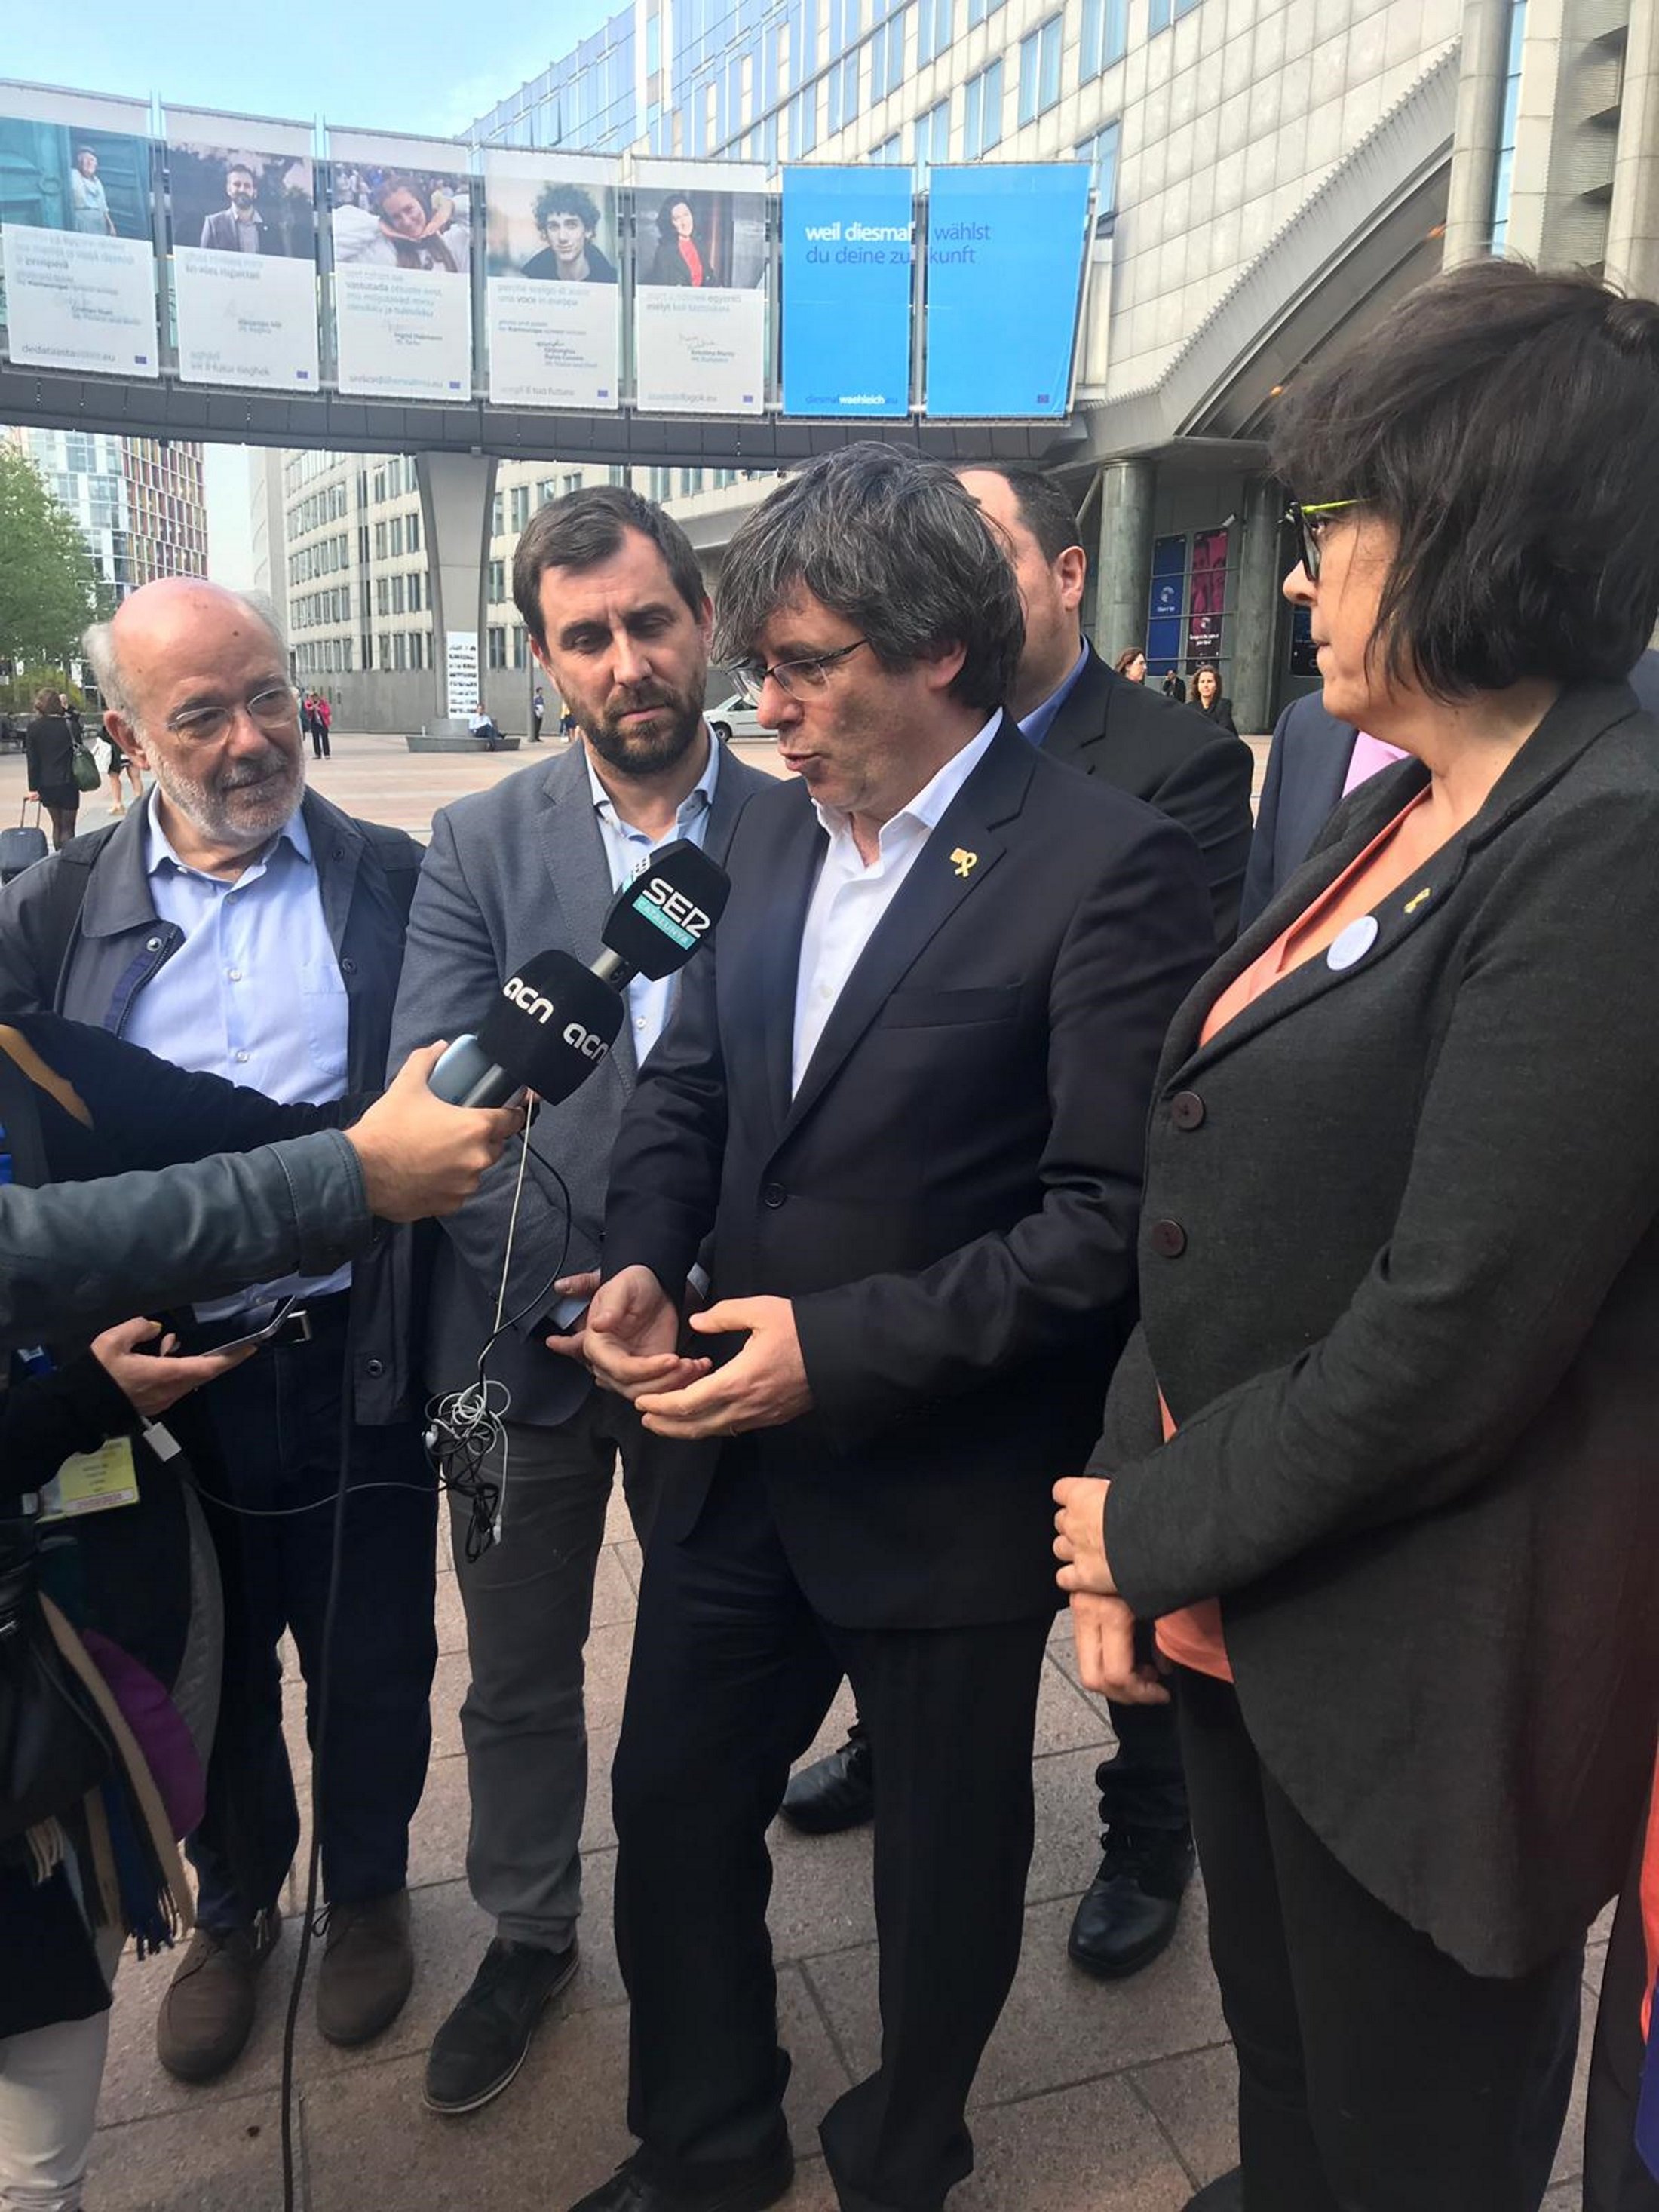 Puigdemont and Comín stopped by European Parliament from getting credentials as MEPs-elect